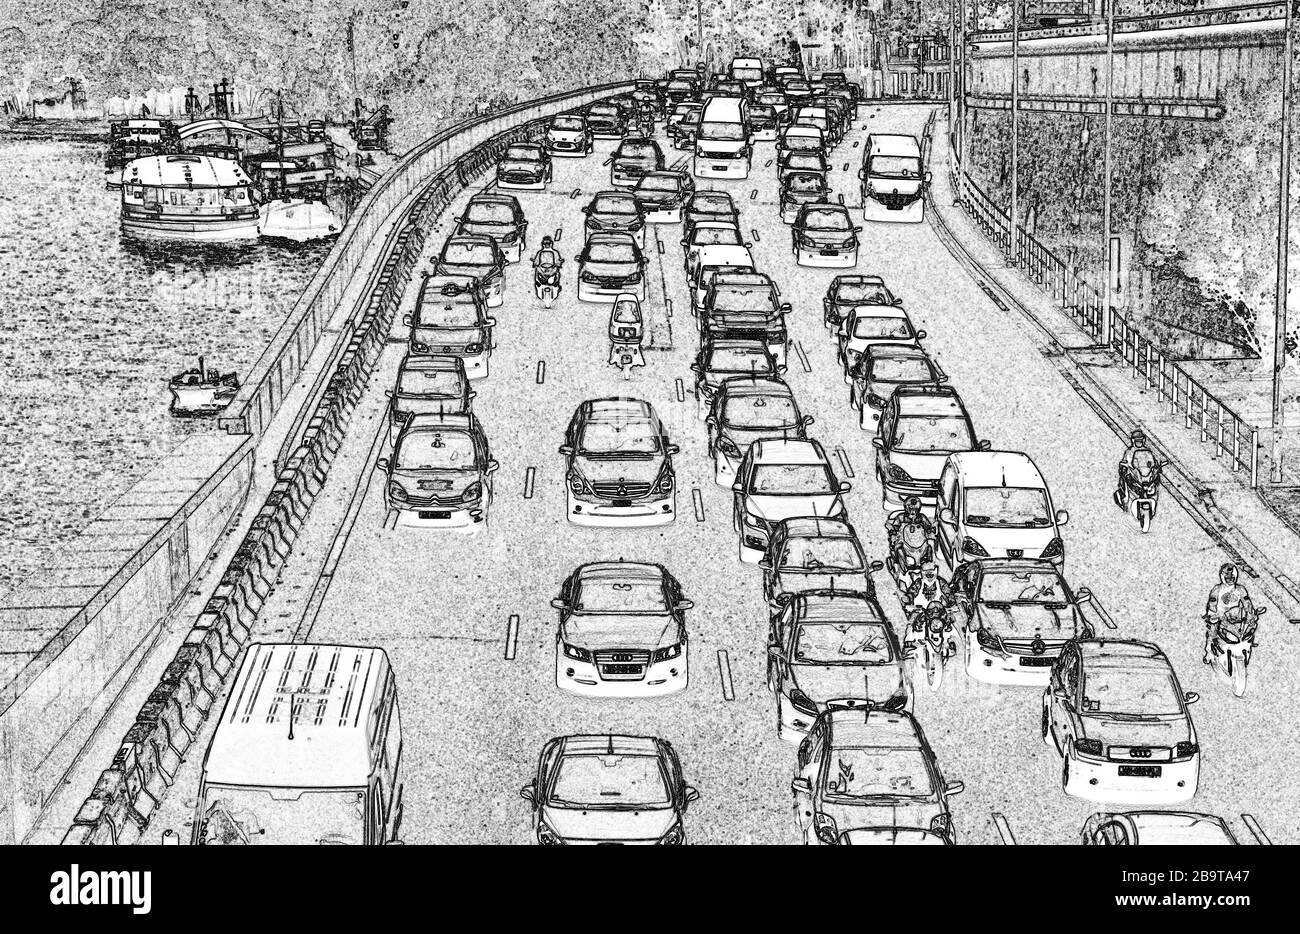 City street traffic jam linear perspective sketch Vector Image